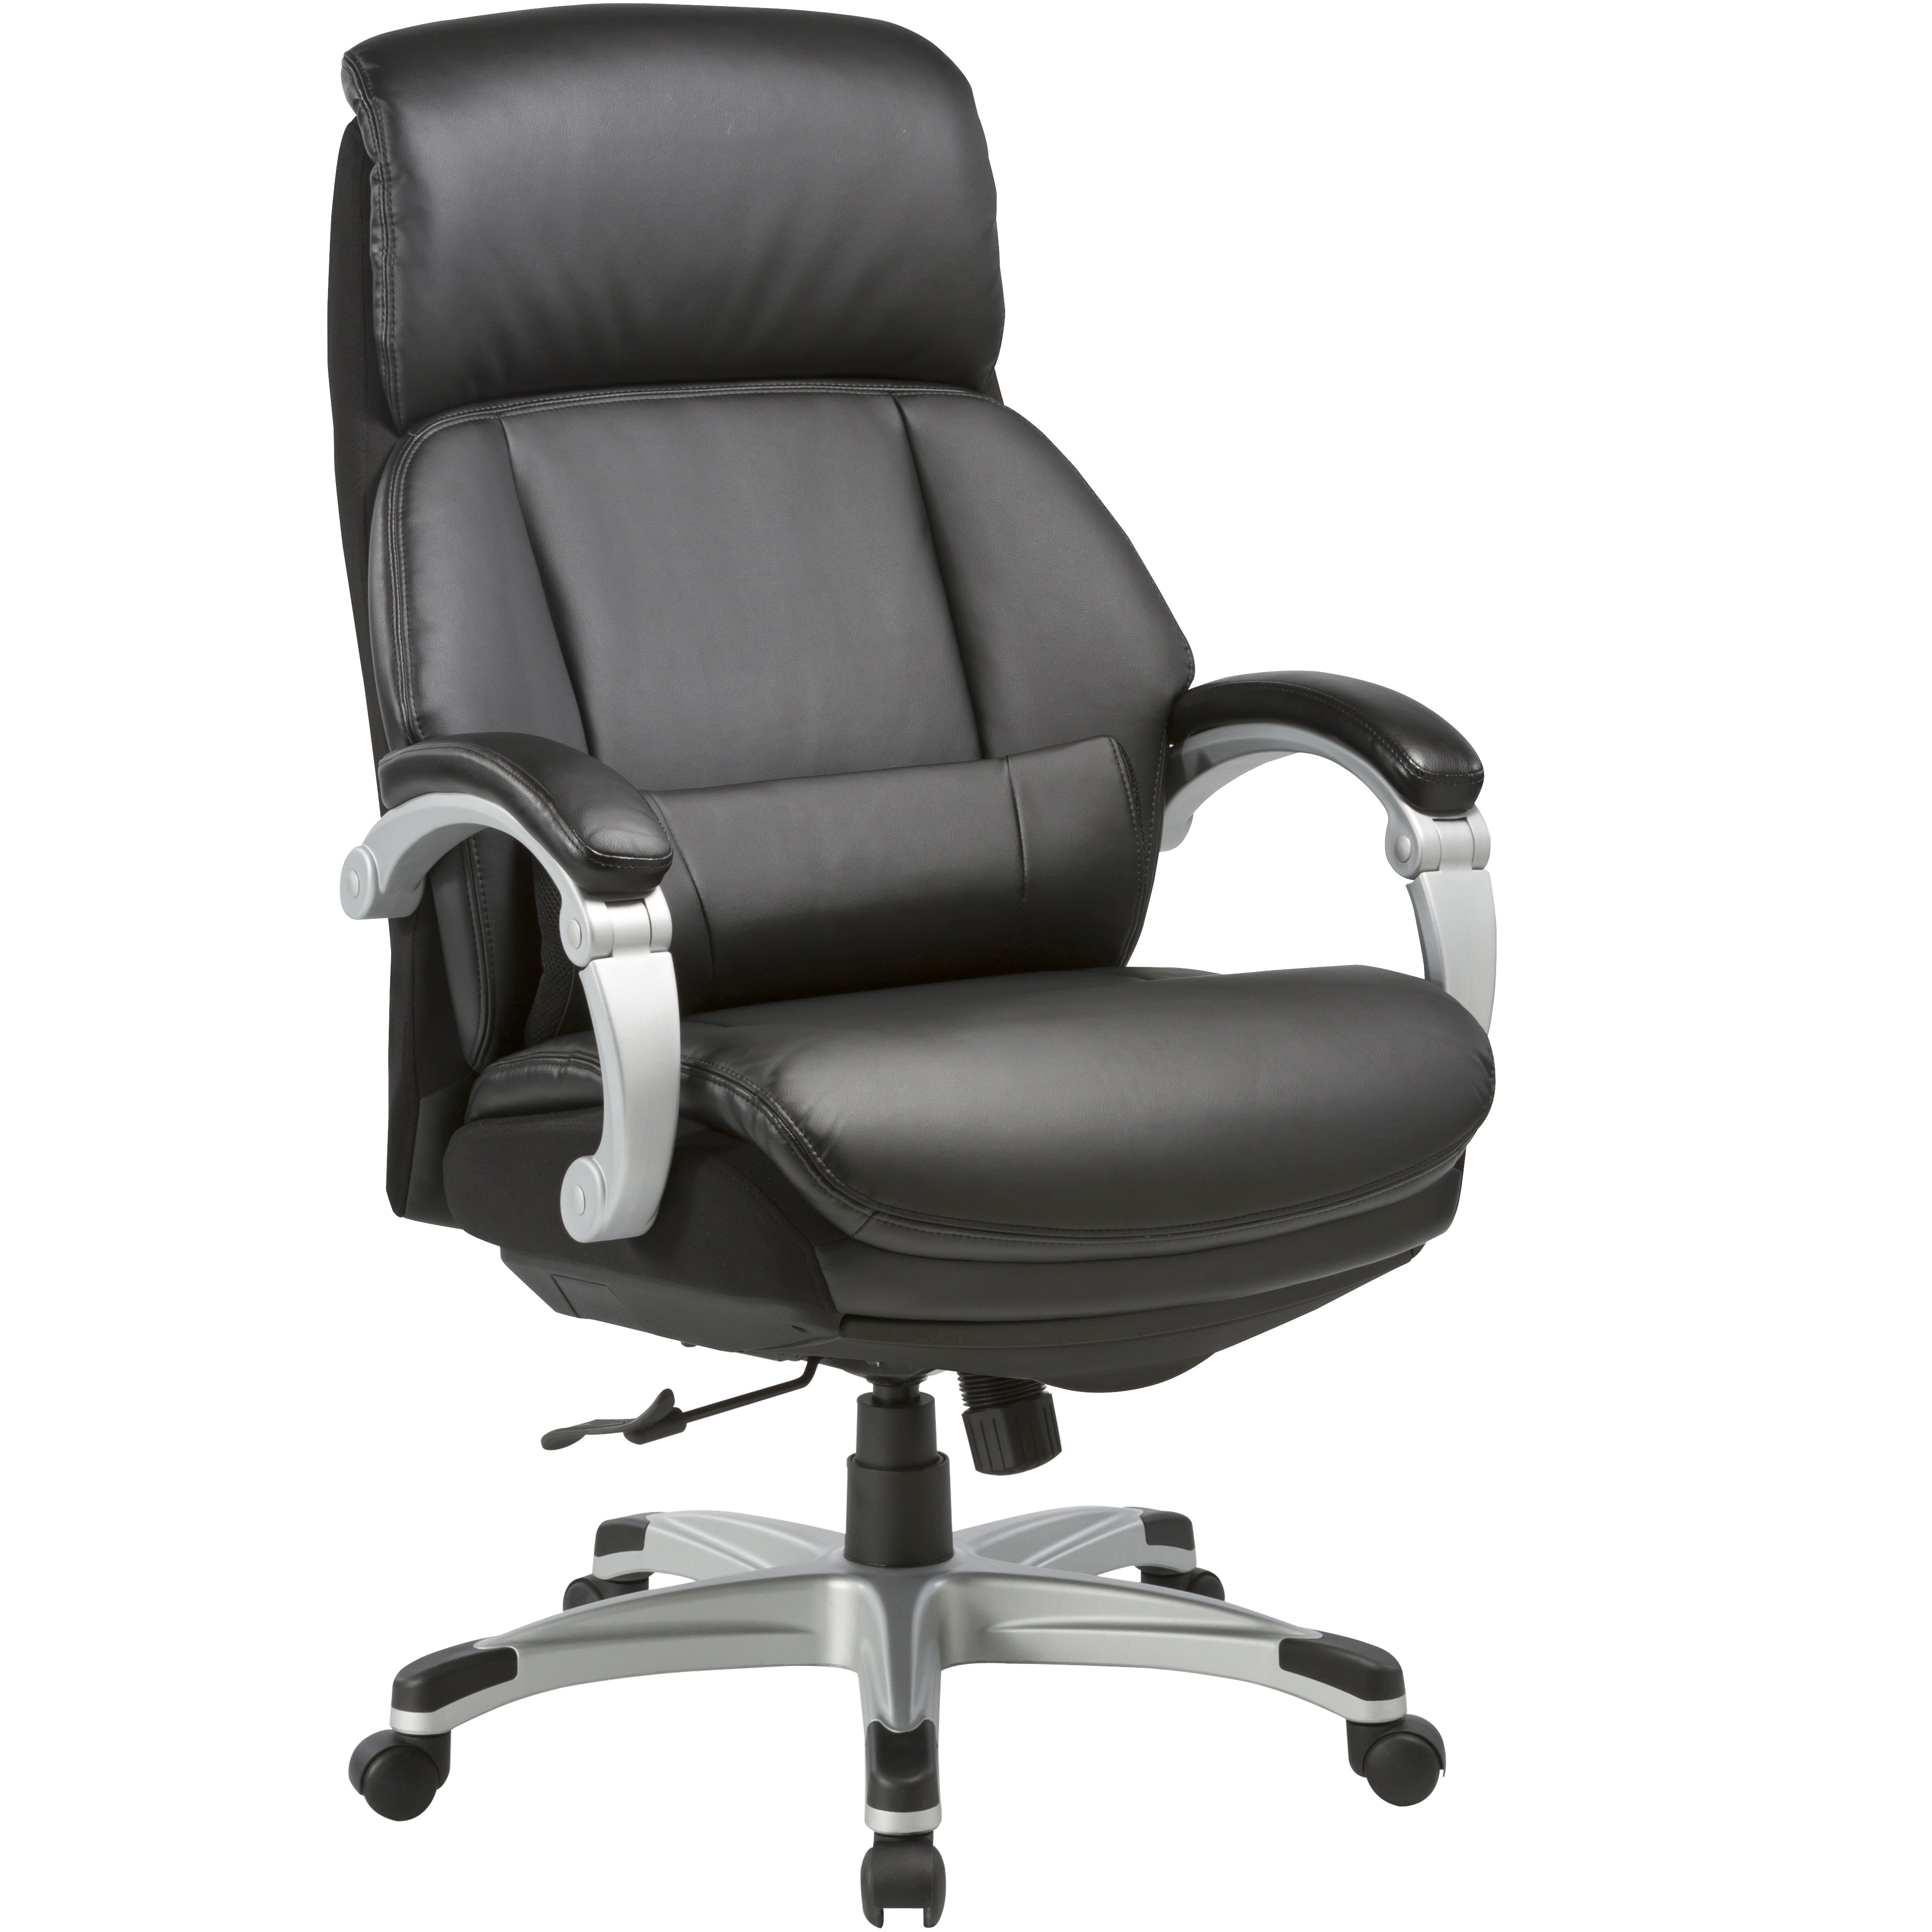 VOFFOV® Big & Tall Ergonomic Bonded Leather Office Chair with Lumbar Support